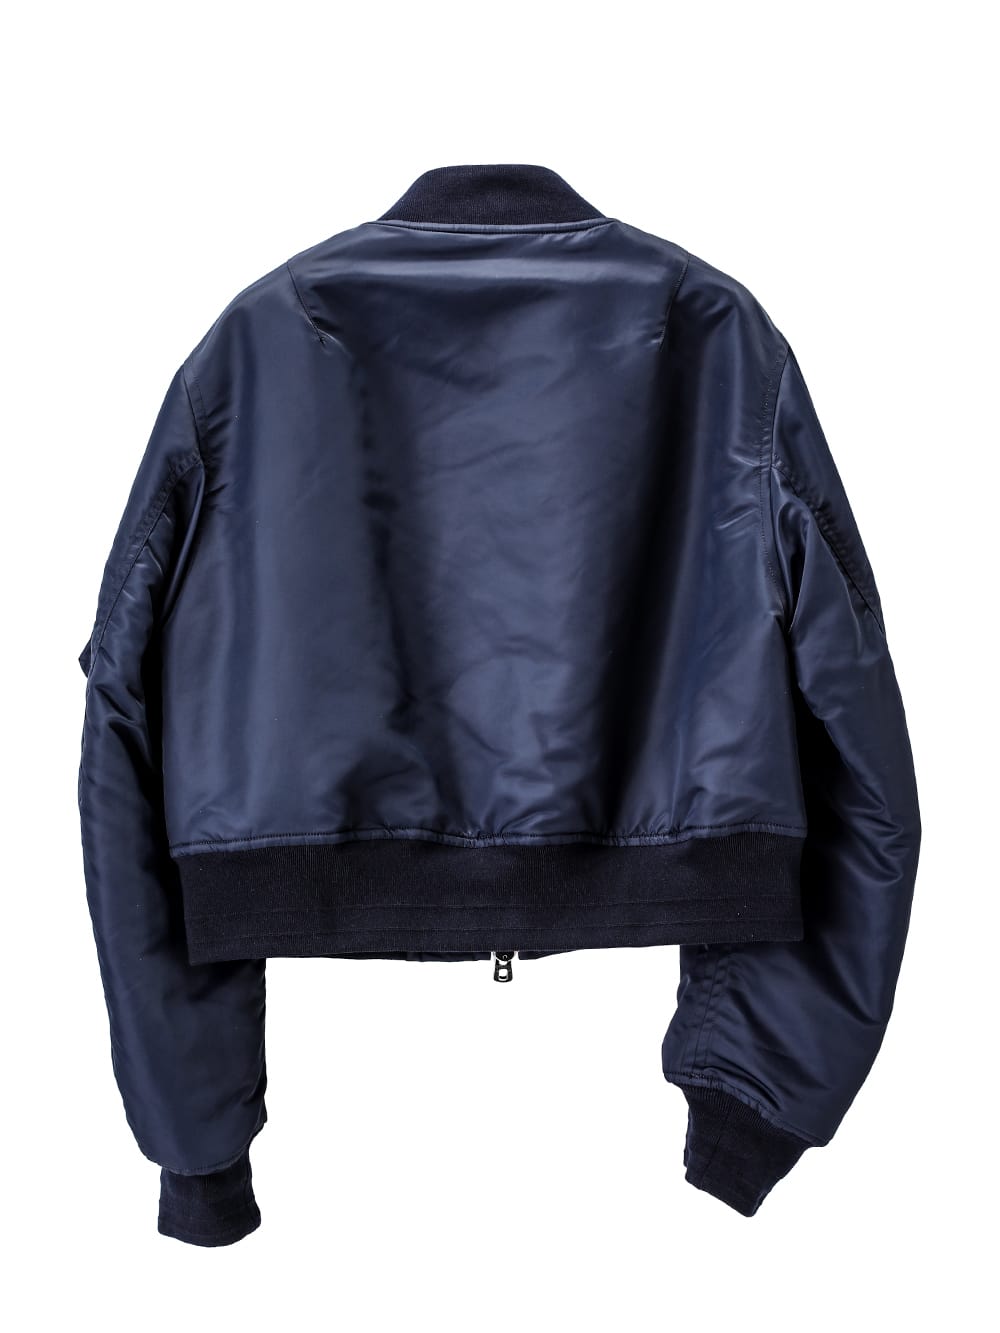 sj.0018bAW23-midnight two-way cropped bomber jacket. THE TWO OF US 